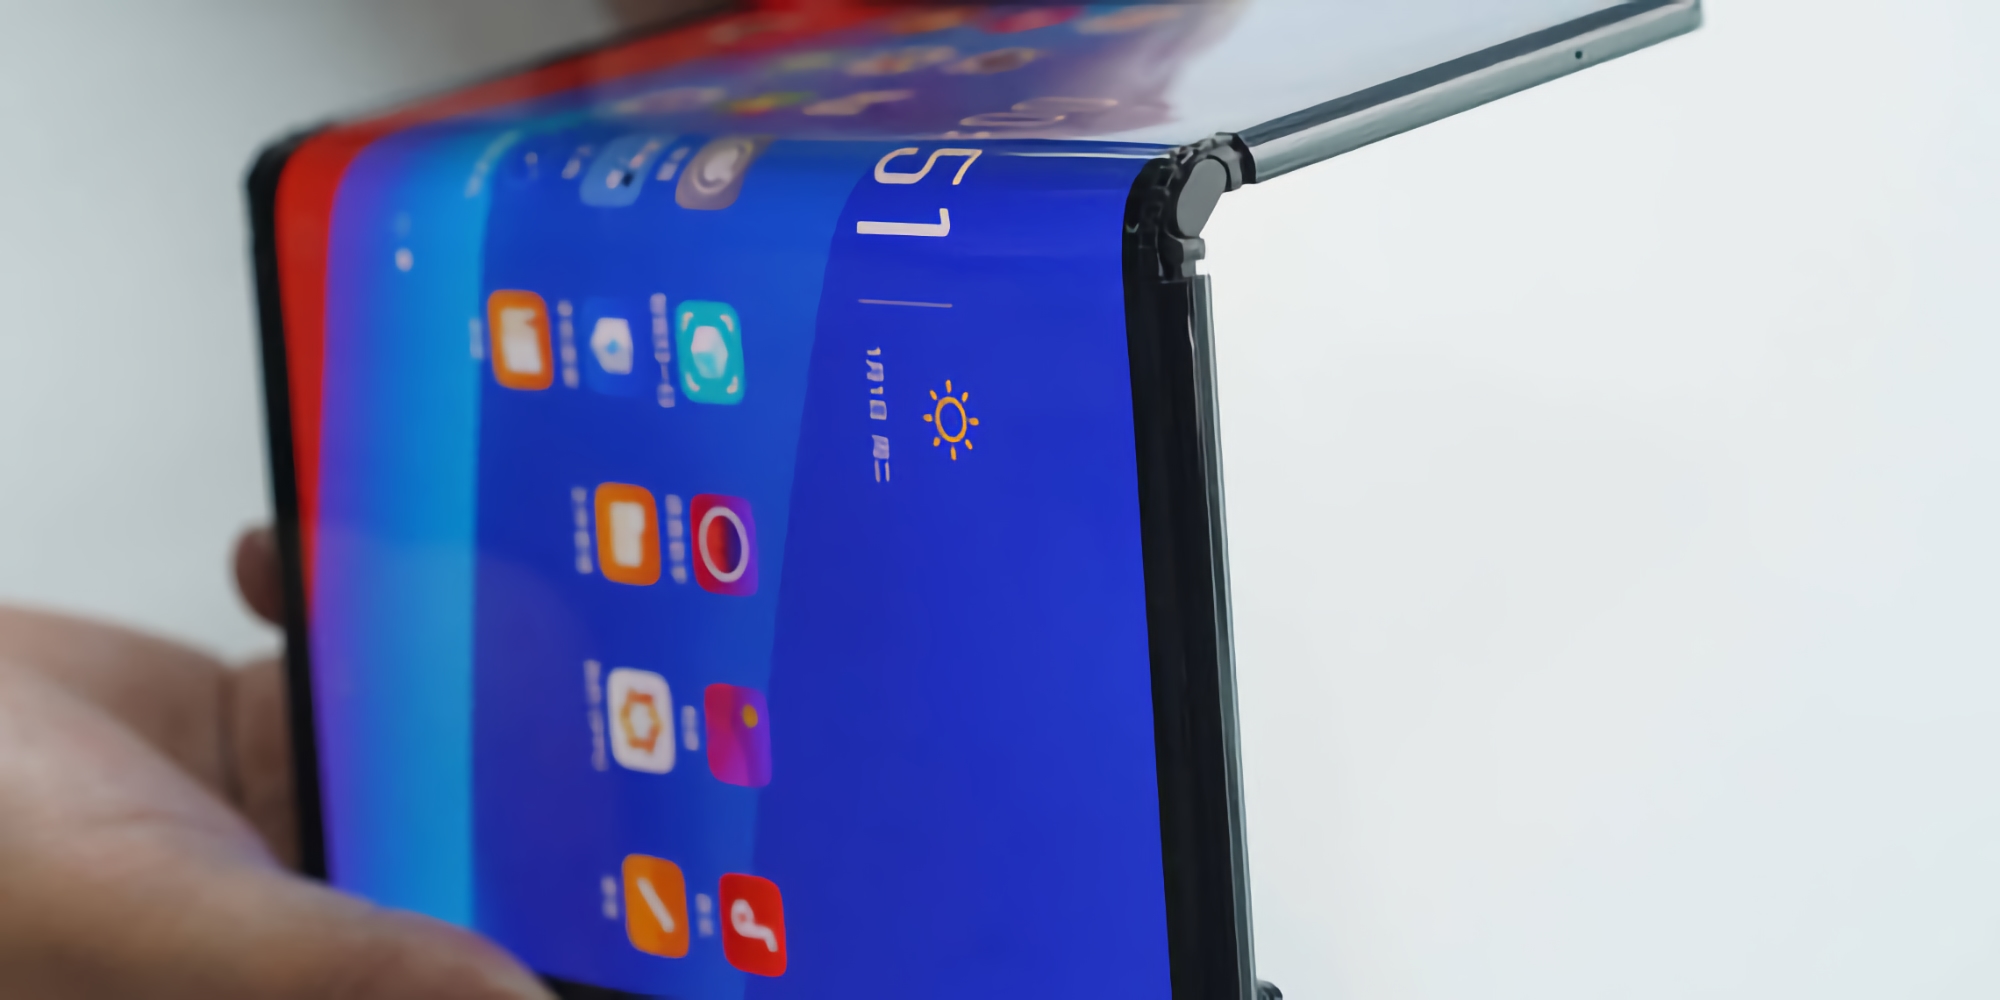 Insider tells when OPPO's first foldable smartphone will hit the market